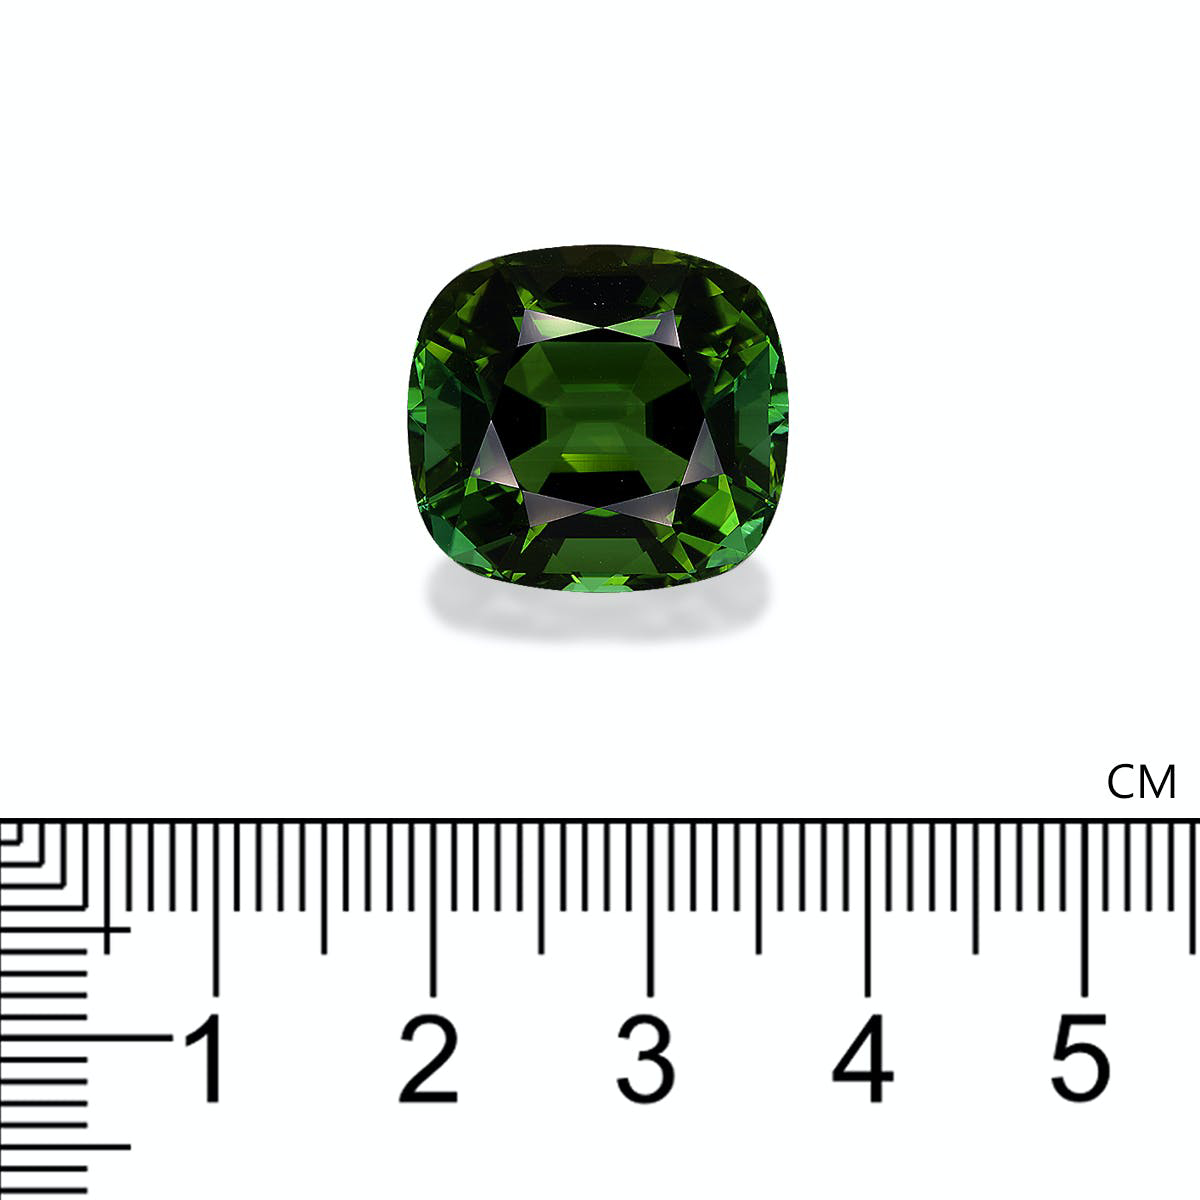 Picture of Forest Green Tourmaline 23.47ct (TG1554)